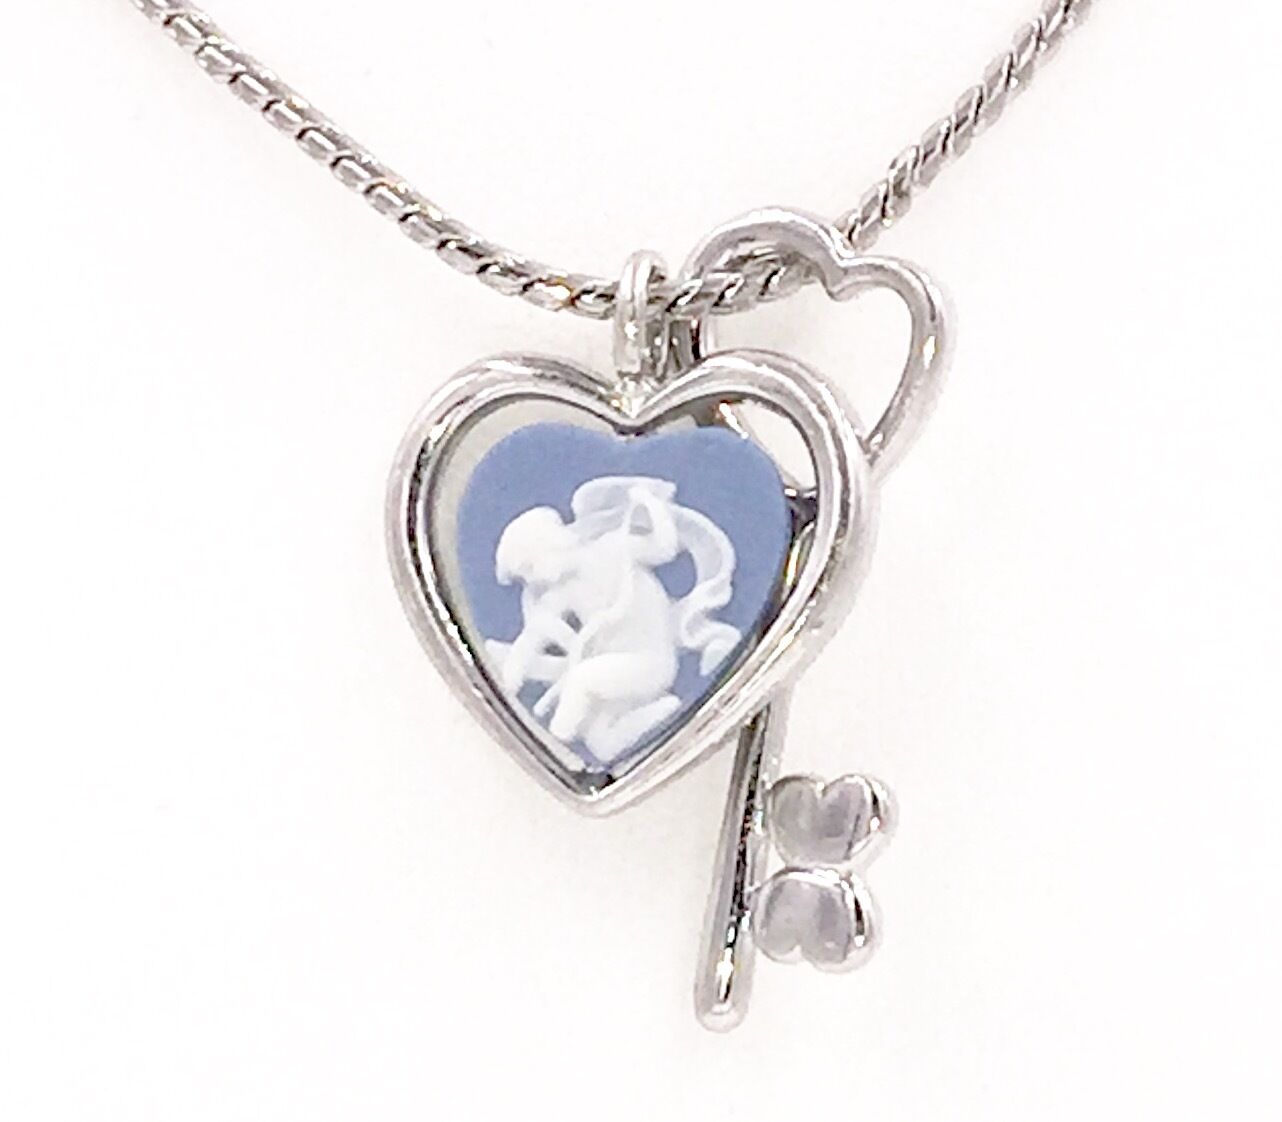 Authentic Wedgwood - Cupid in Heart Cameo w/Heart Key on Silver Plate Chain